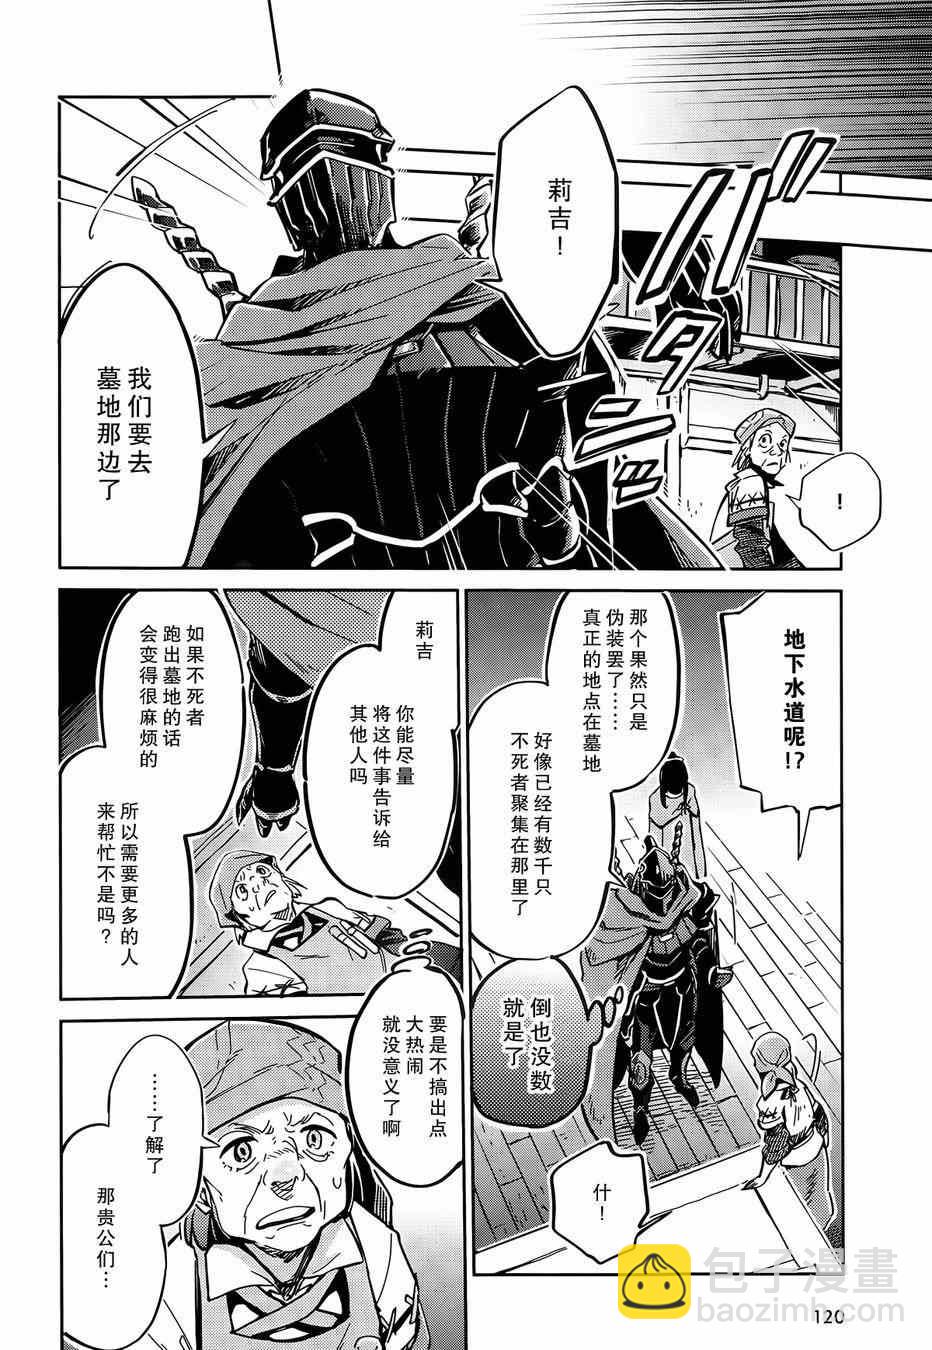 OVERLORD - 第7话 - 6